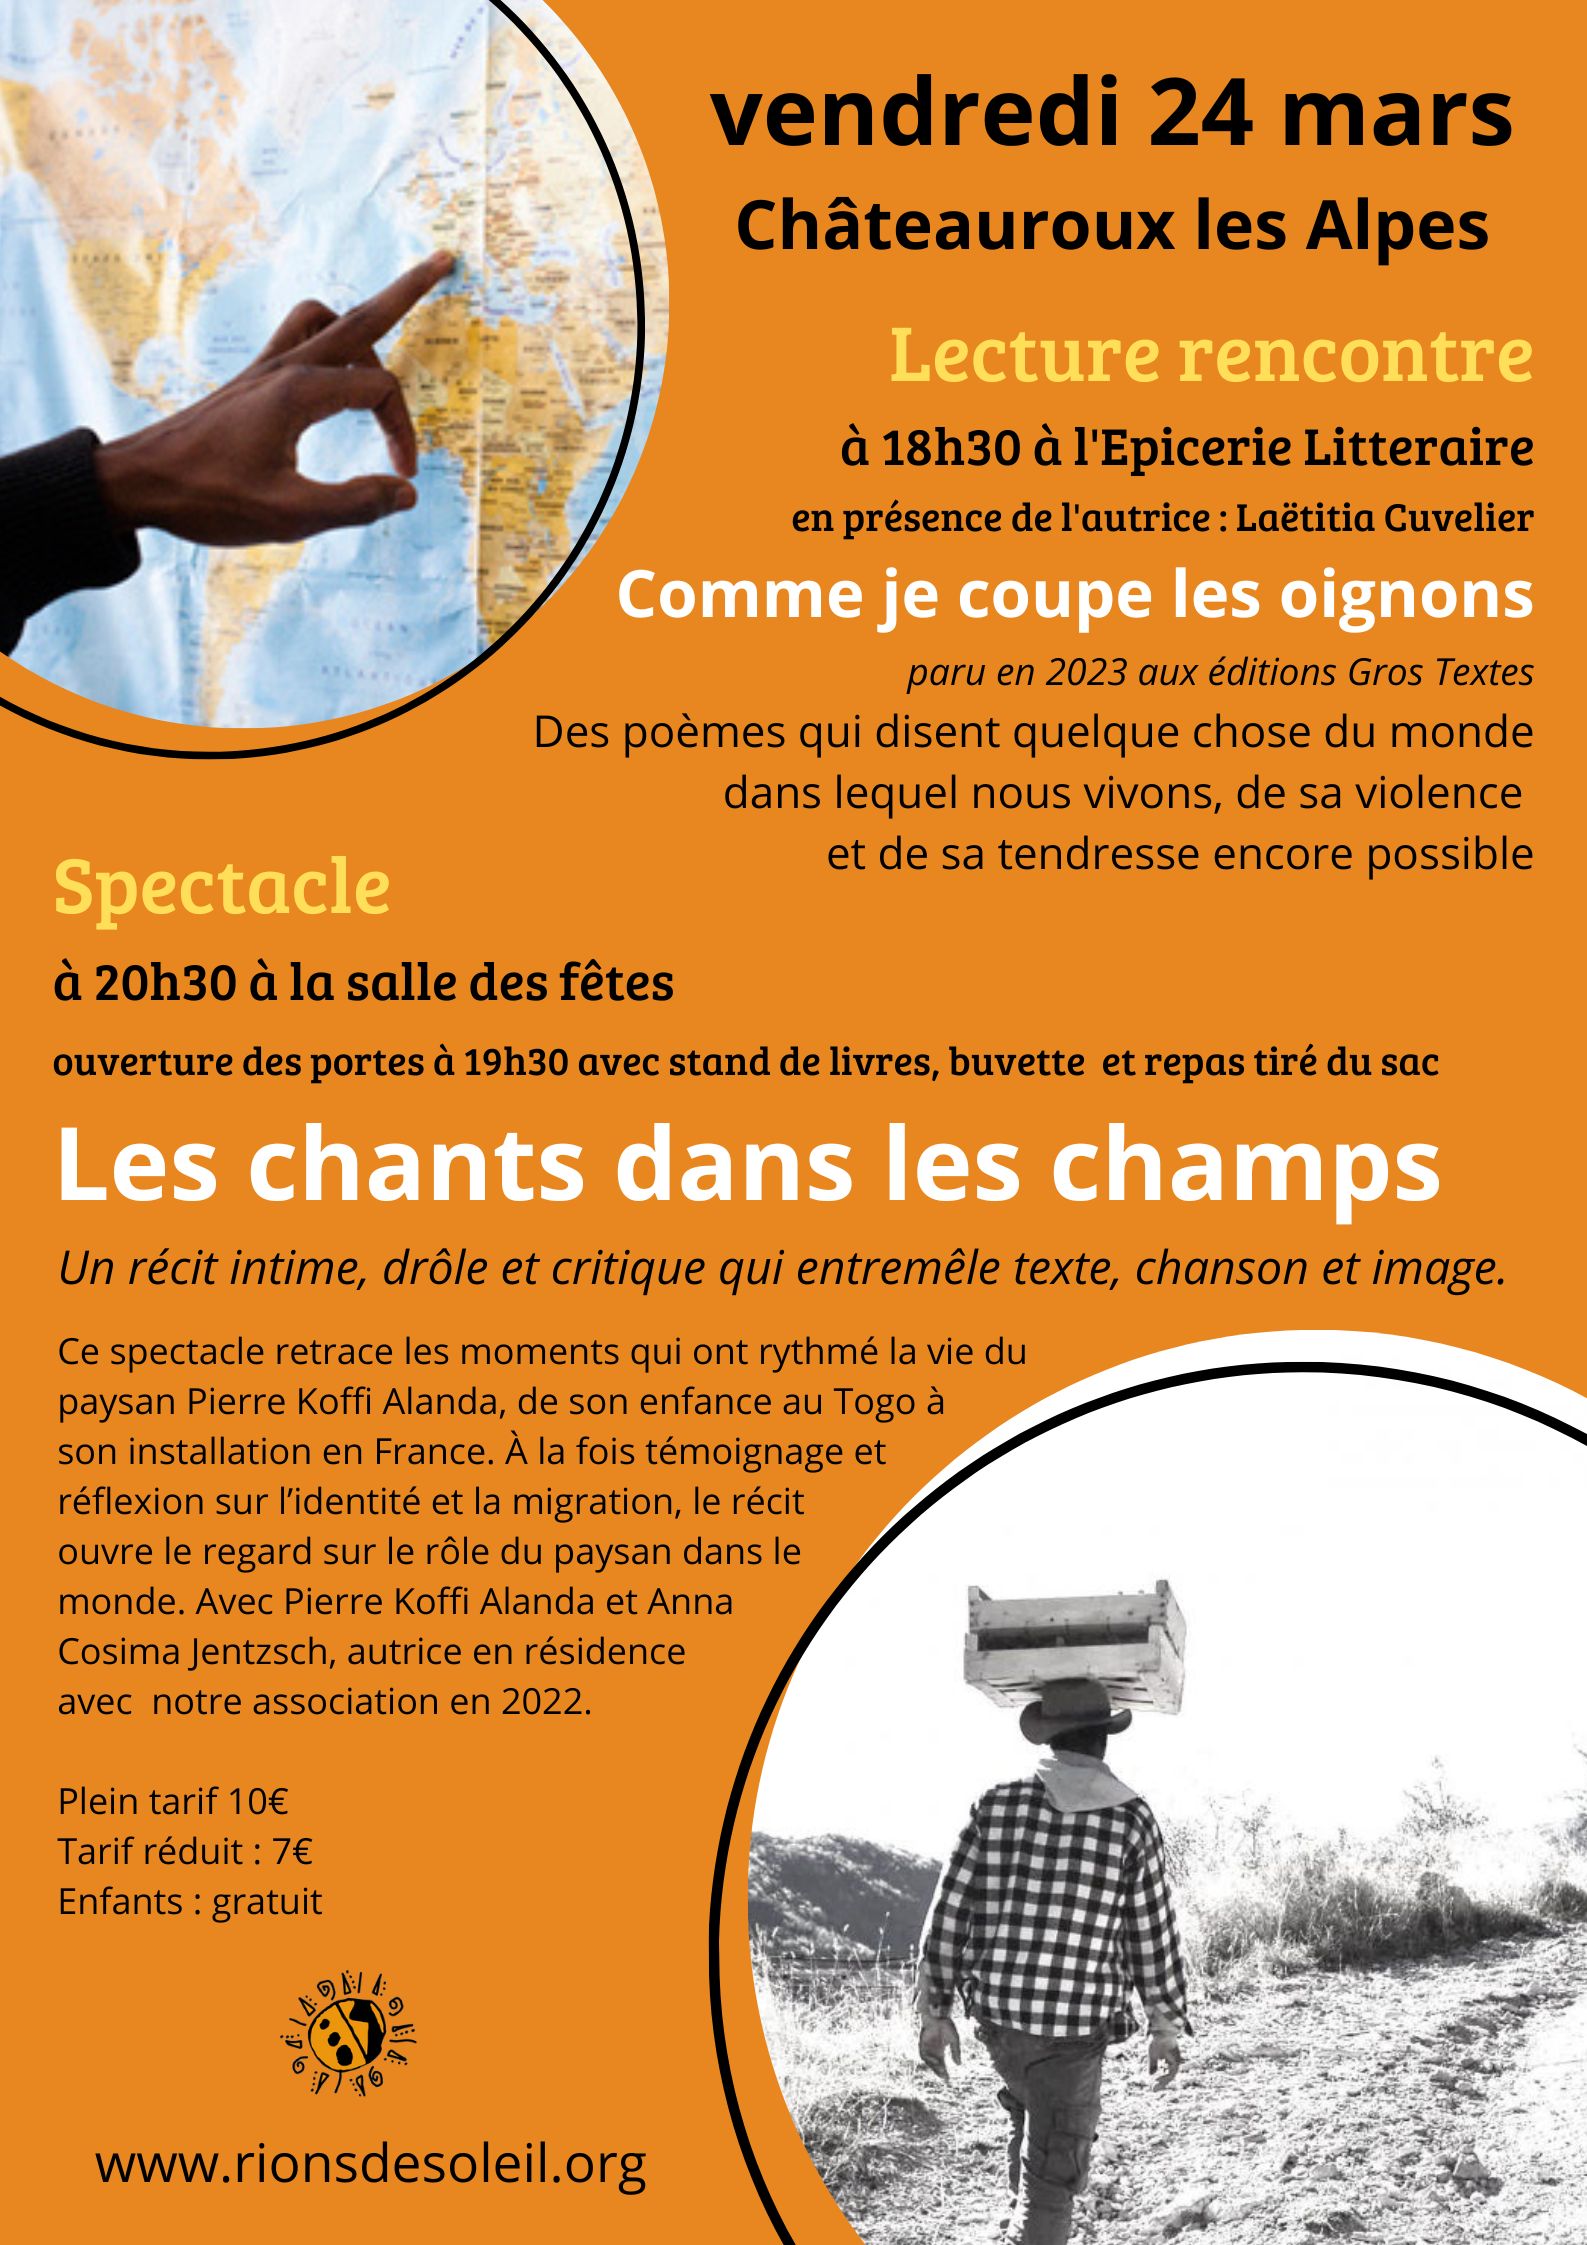 Lecture rencontre & spectacle